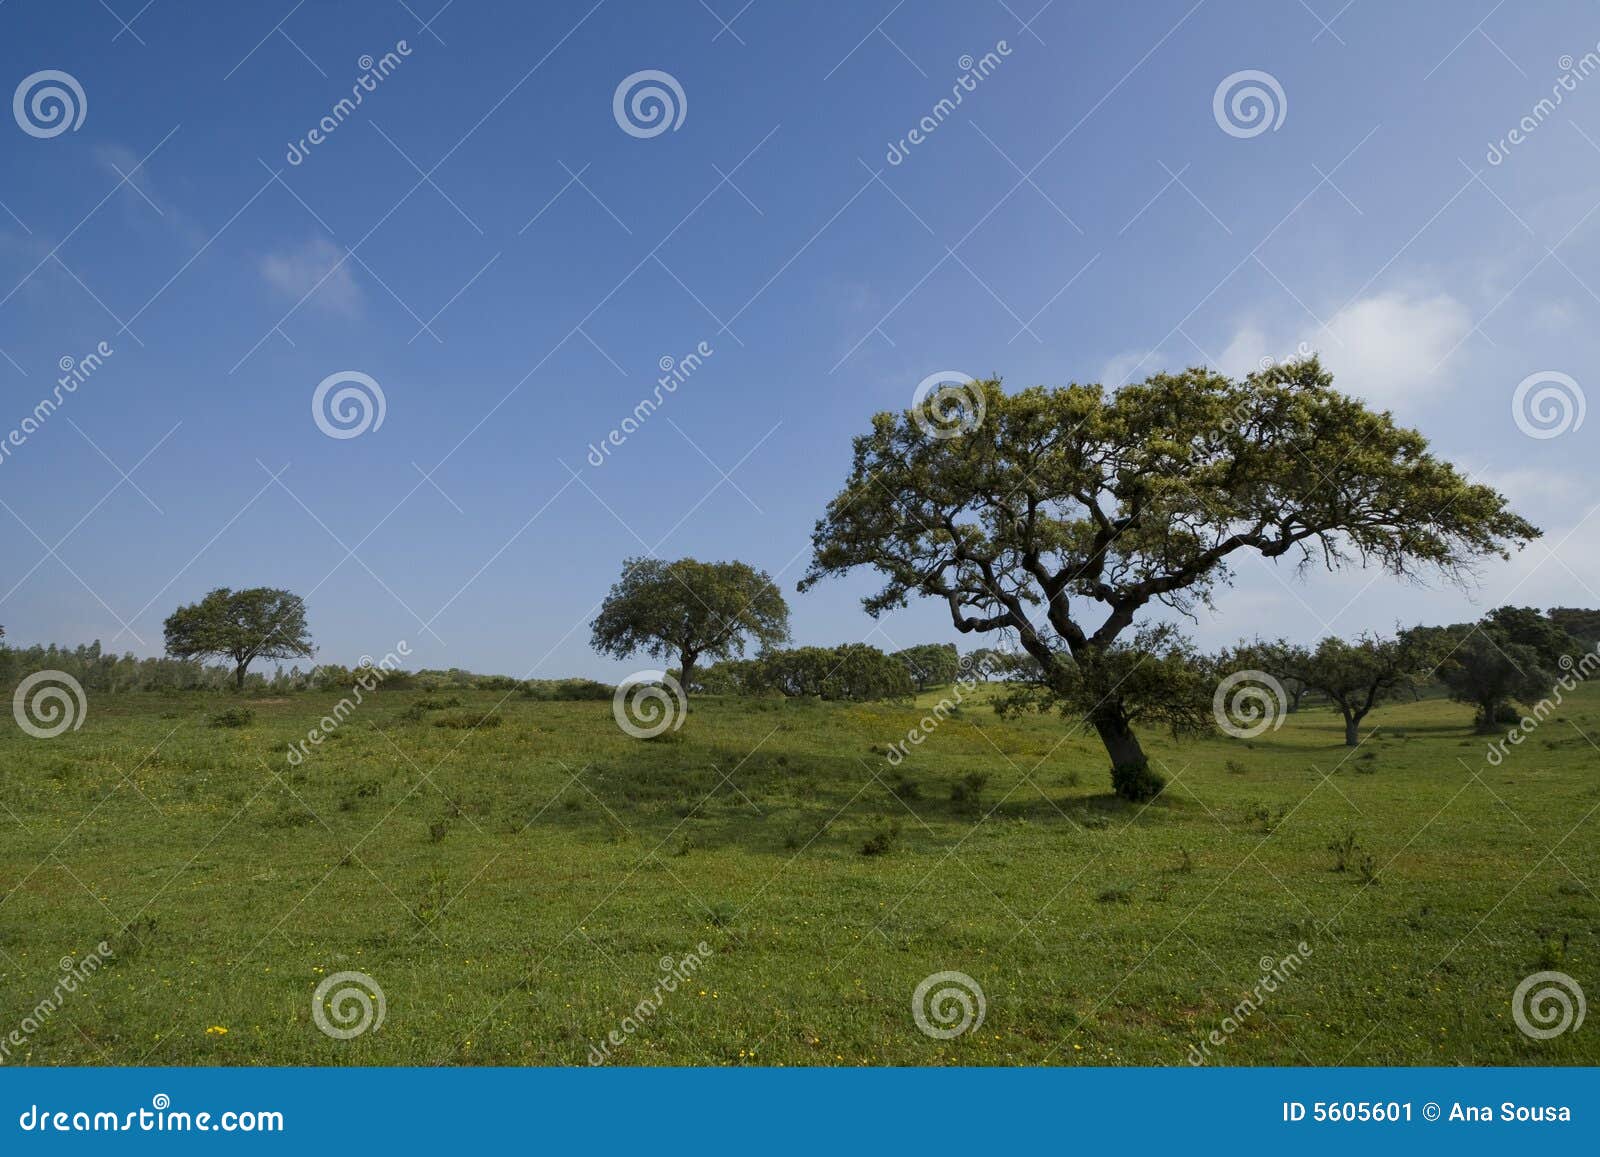 Beautiful field landscape with trees